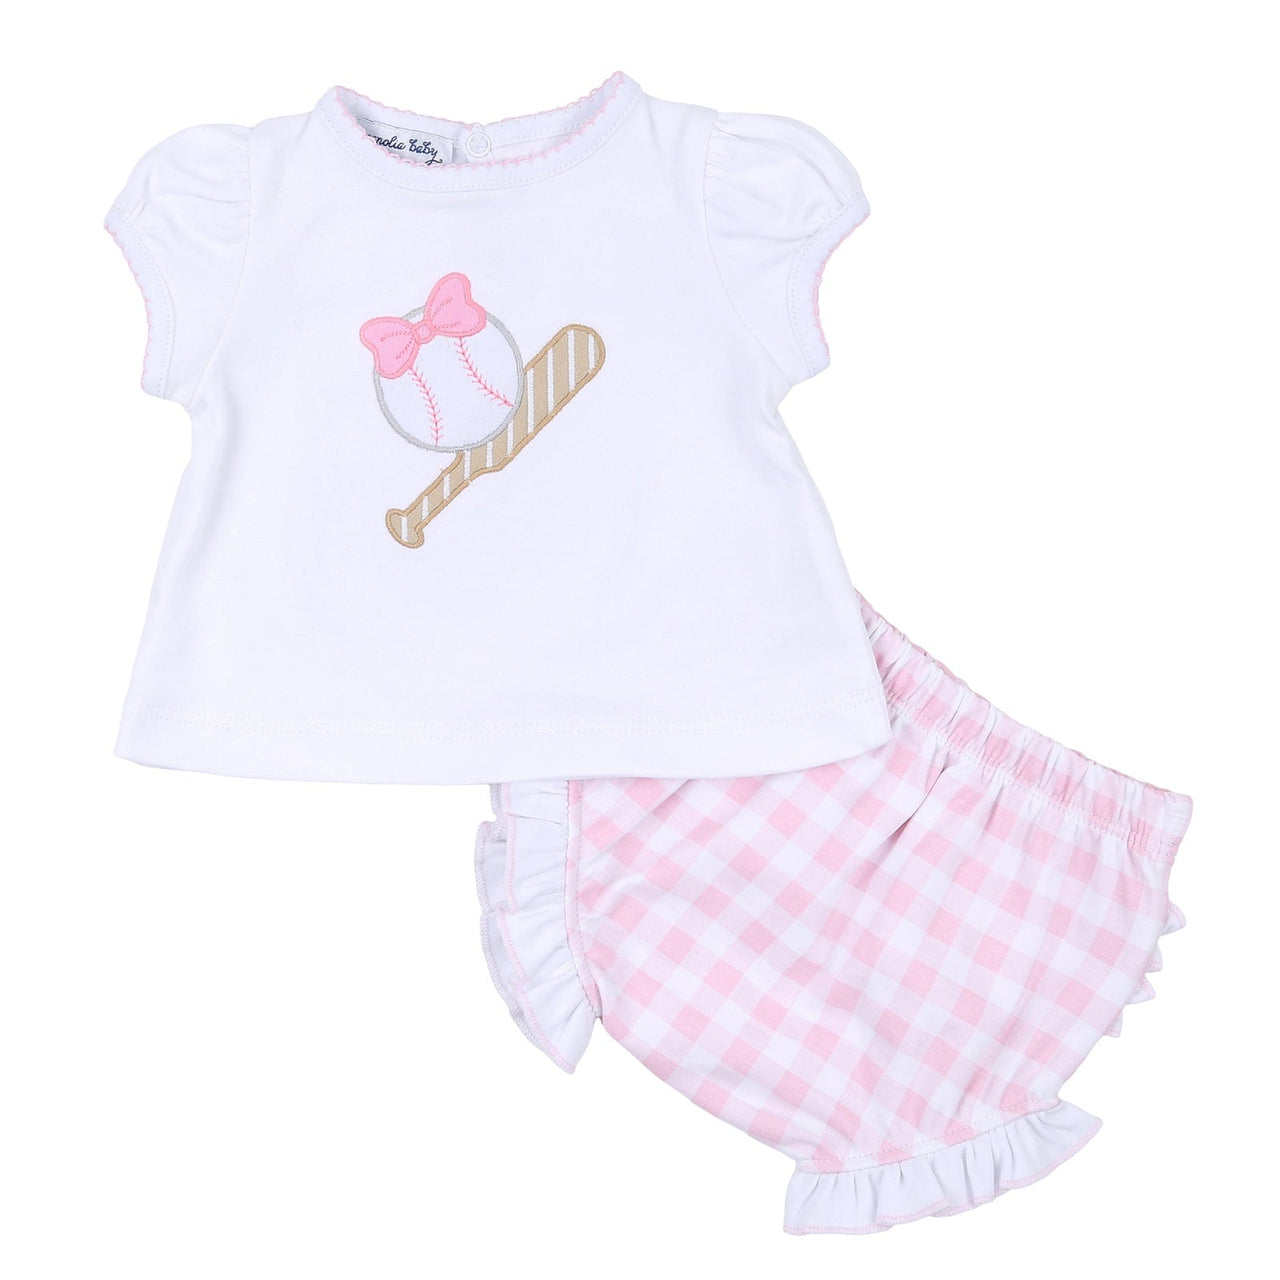 Magnolia Baby Batter Up Ruffle Diaper Cover Set Pink 5283A-505  5010